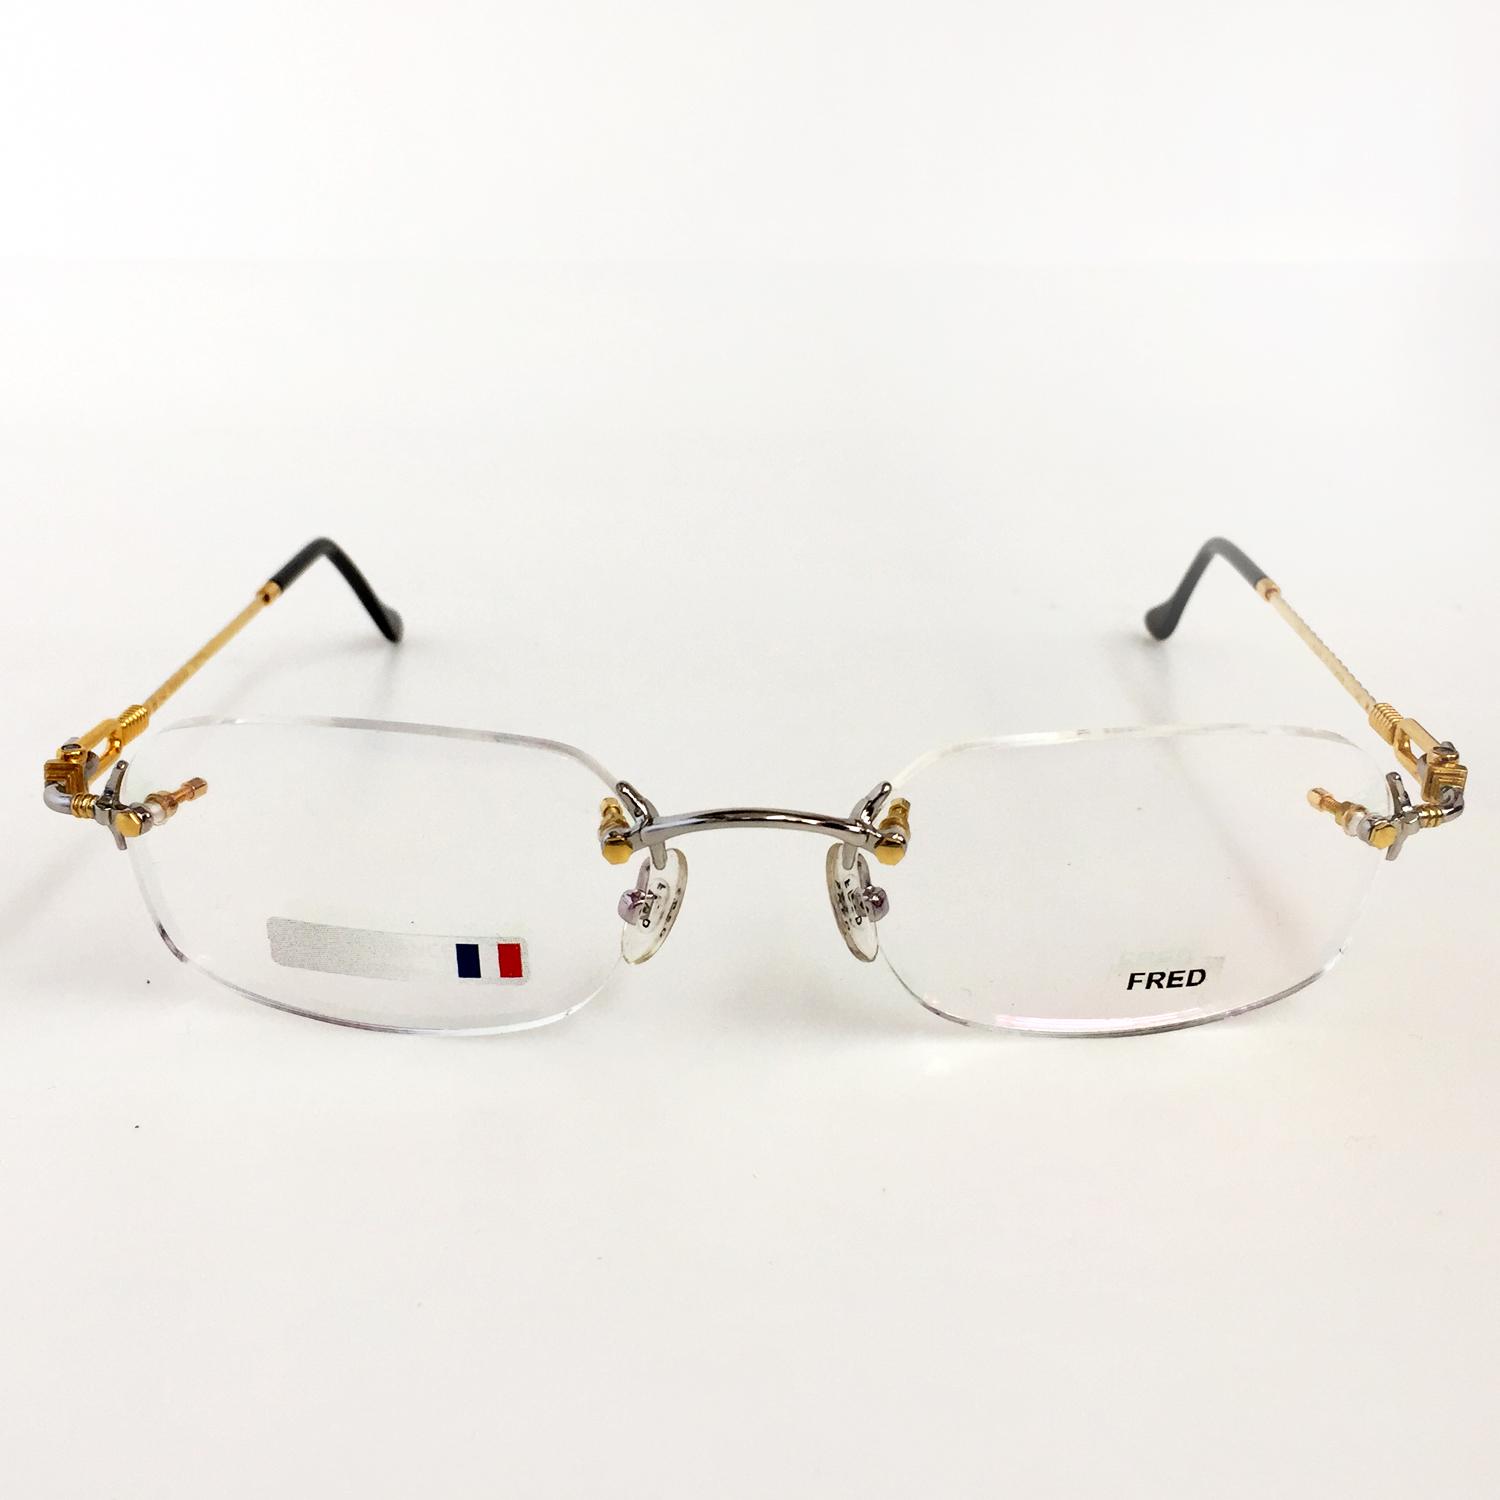 Lot FRED Rimless frame eyeglasses two tone twisted wire